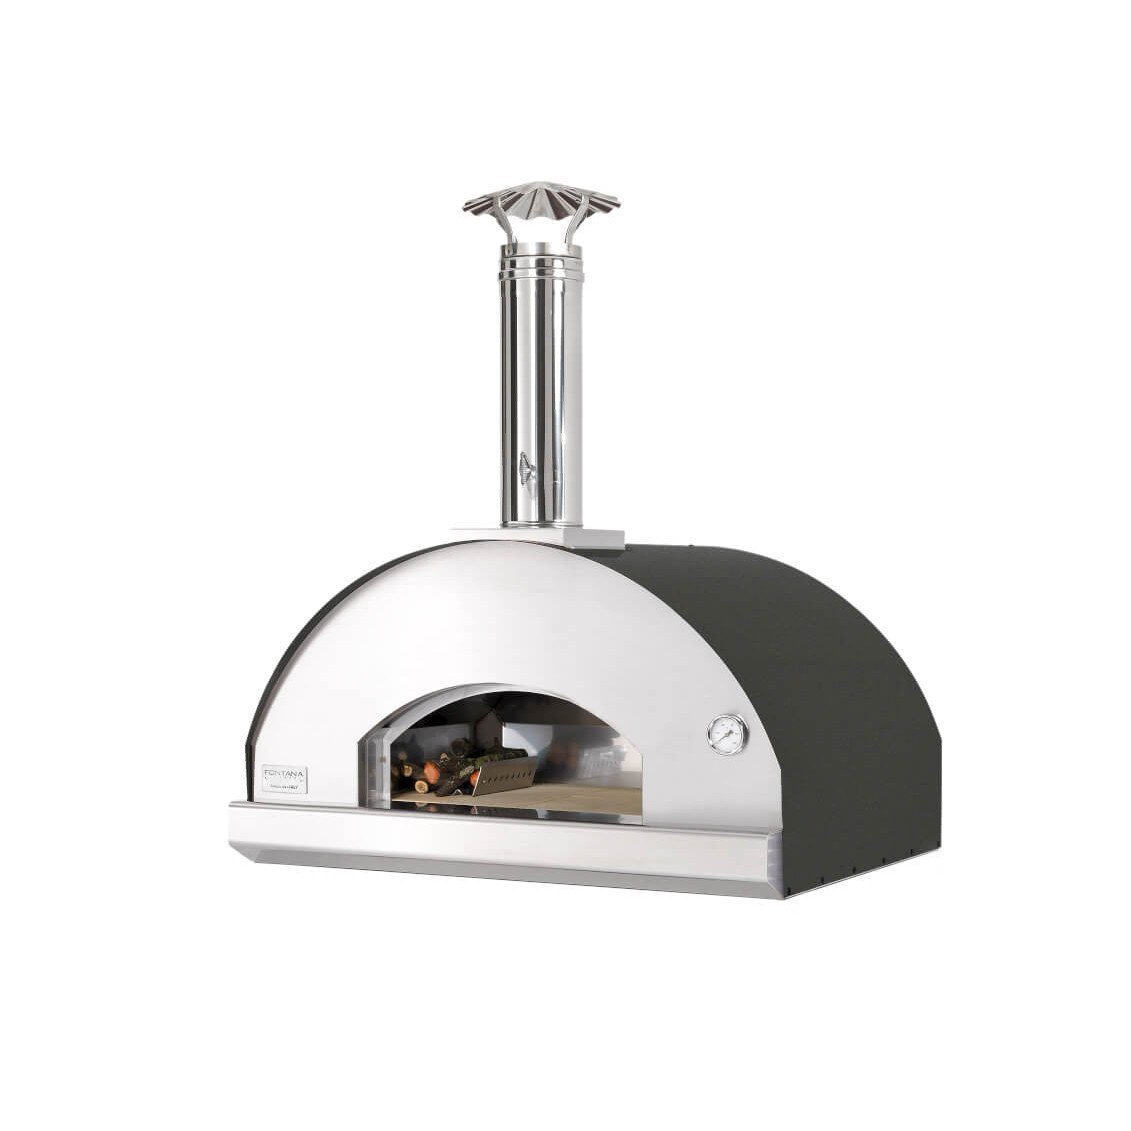 Choosing the Right Pizza Oven for Your Backyard